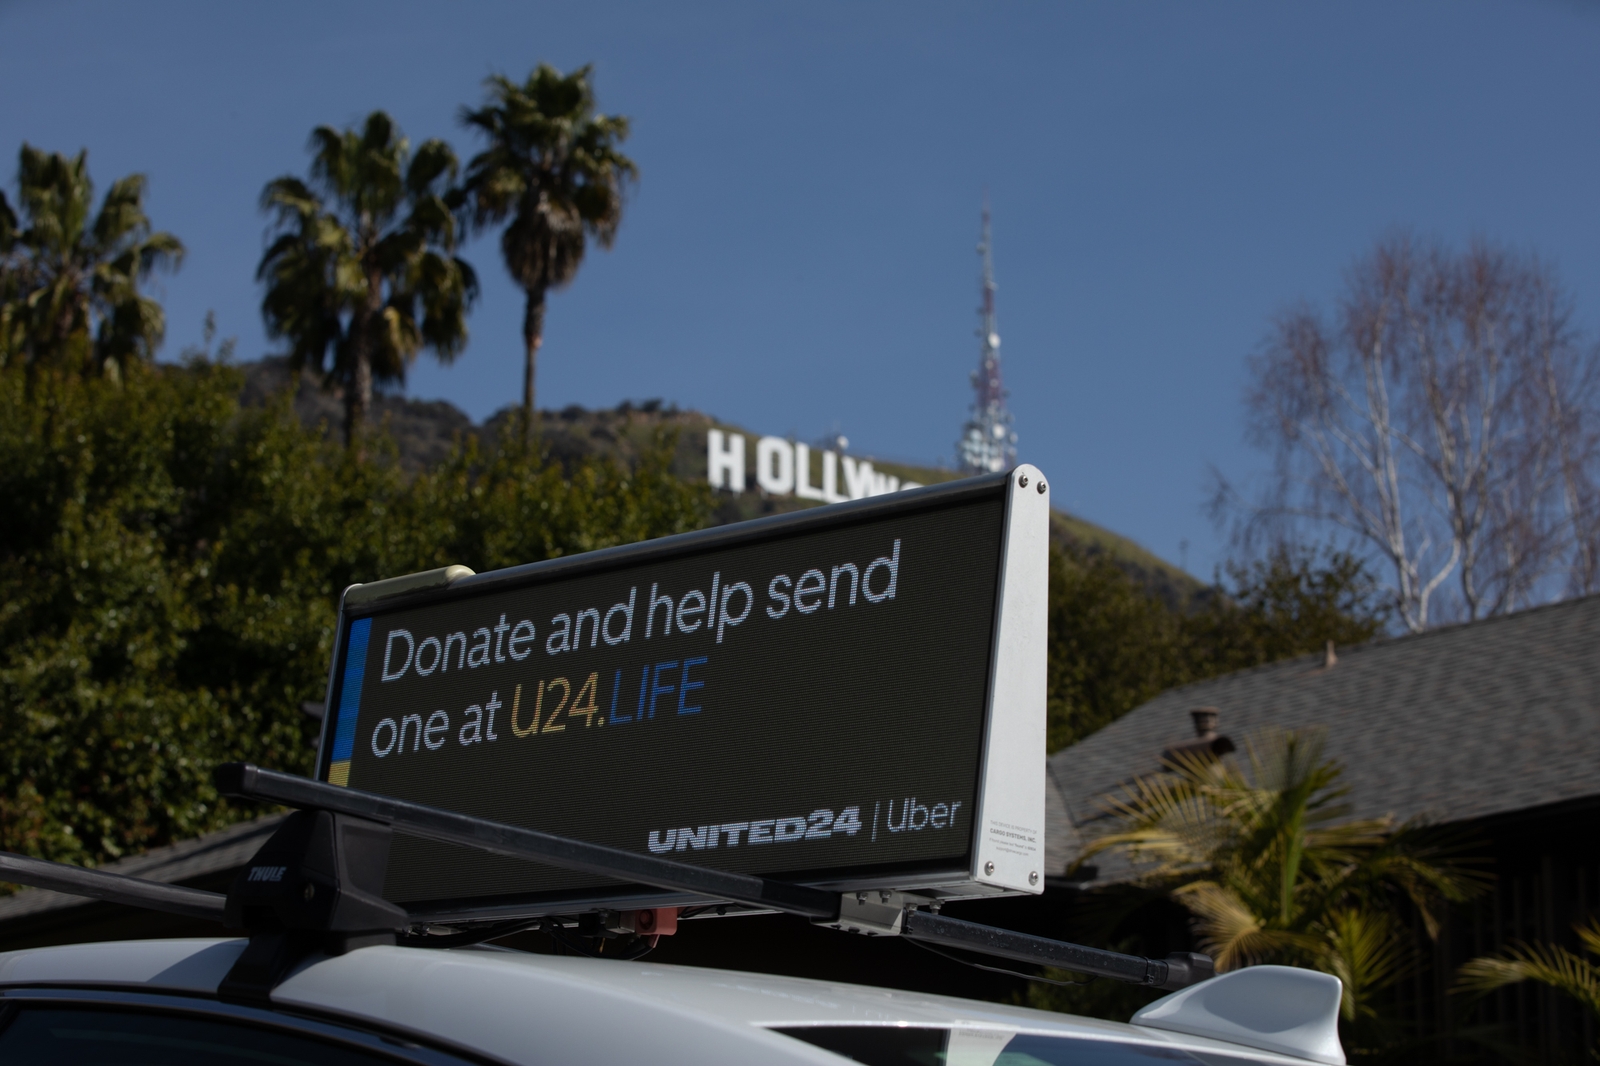 One Year On - UNITED24 Partners with Uber’s Cartop Advertising Team to Help Drive Donations